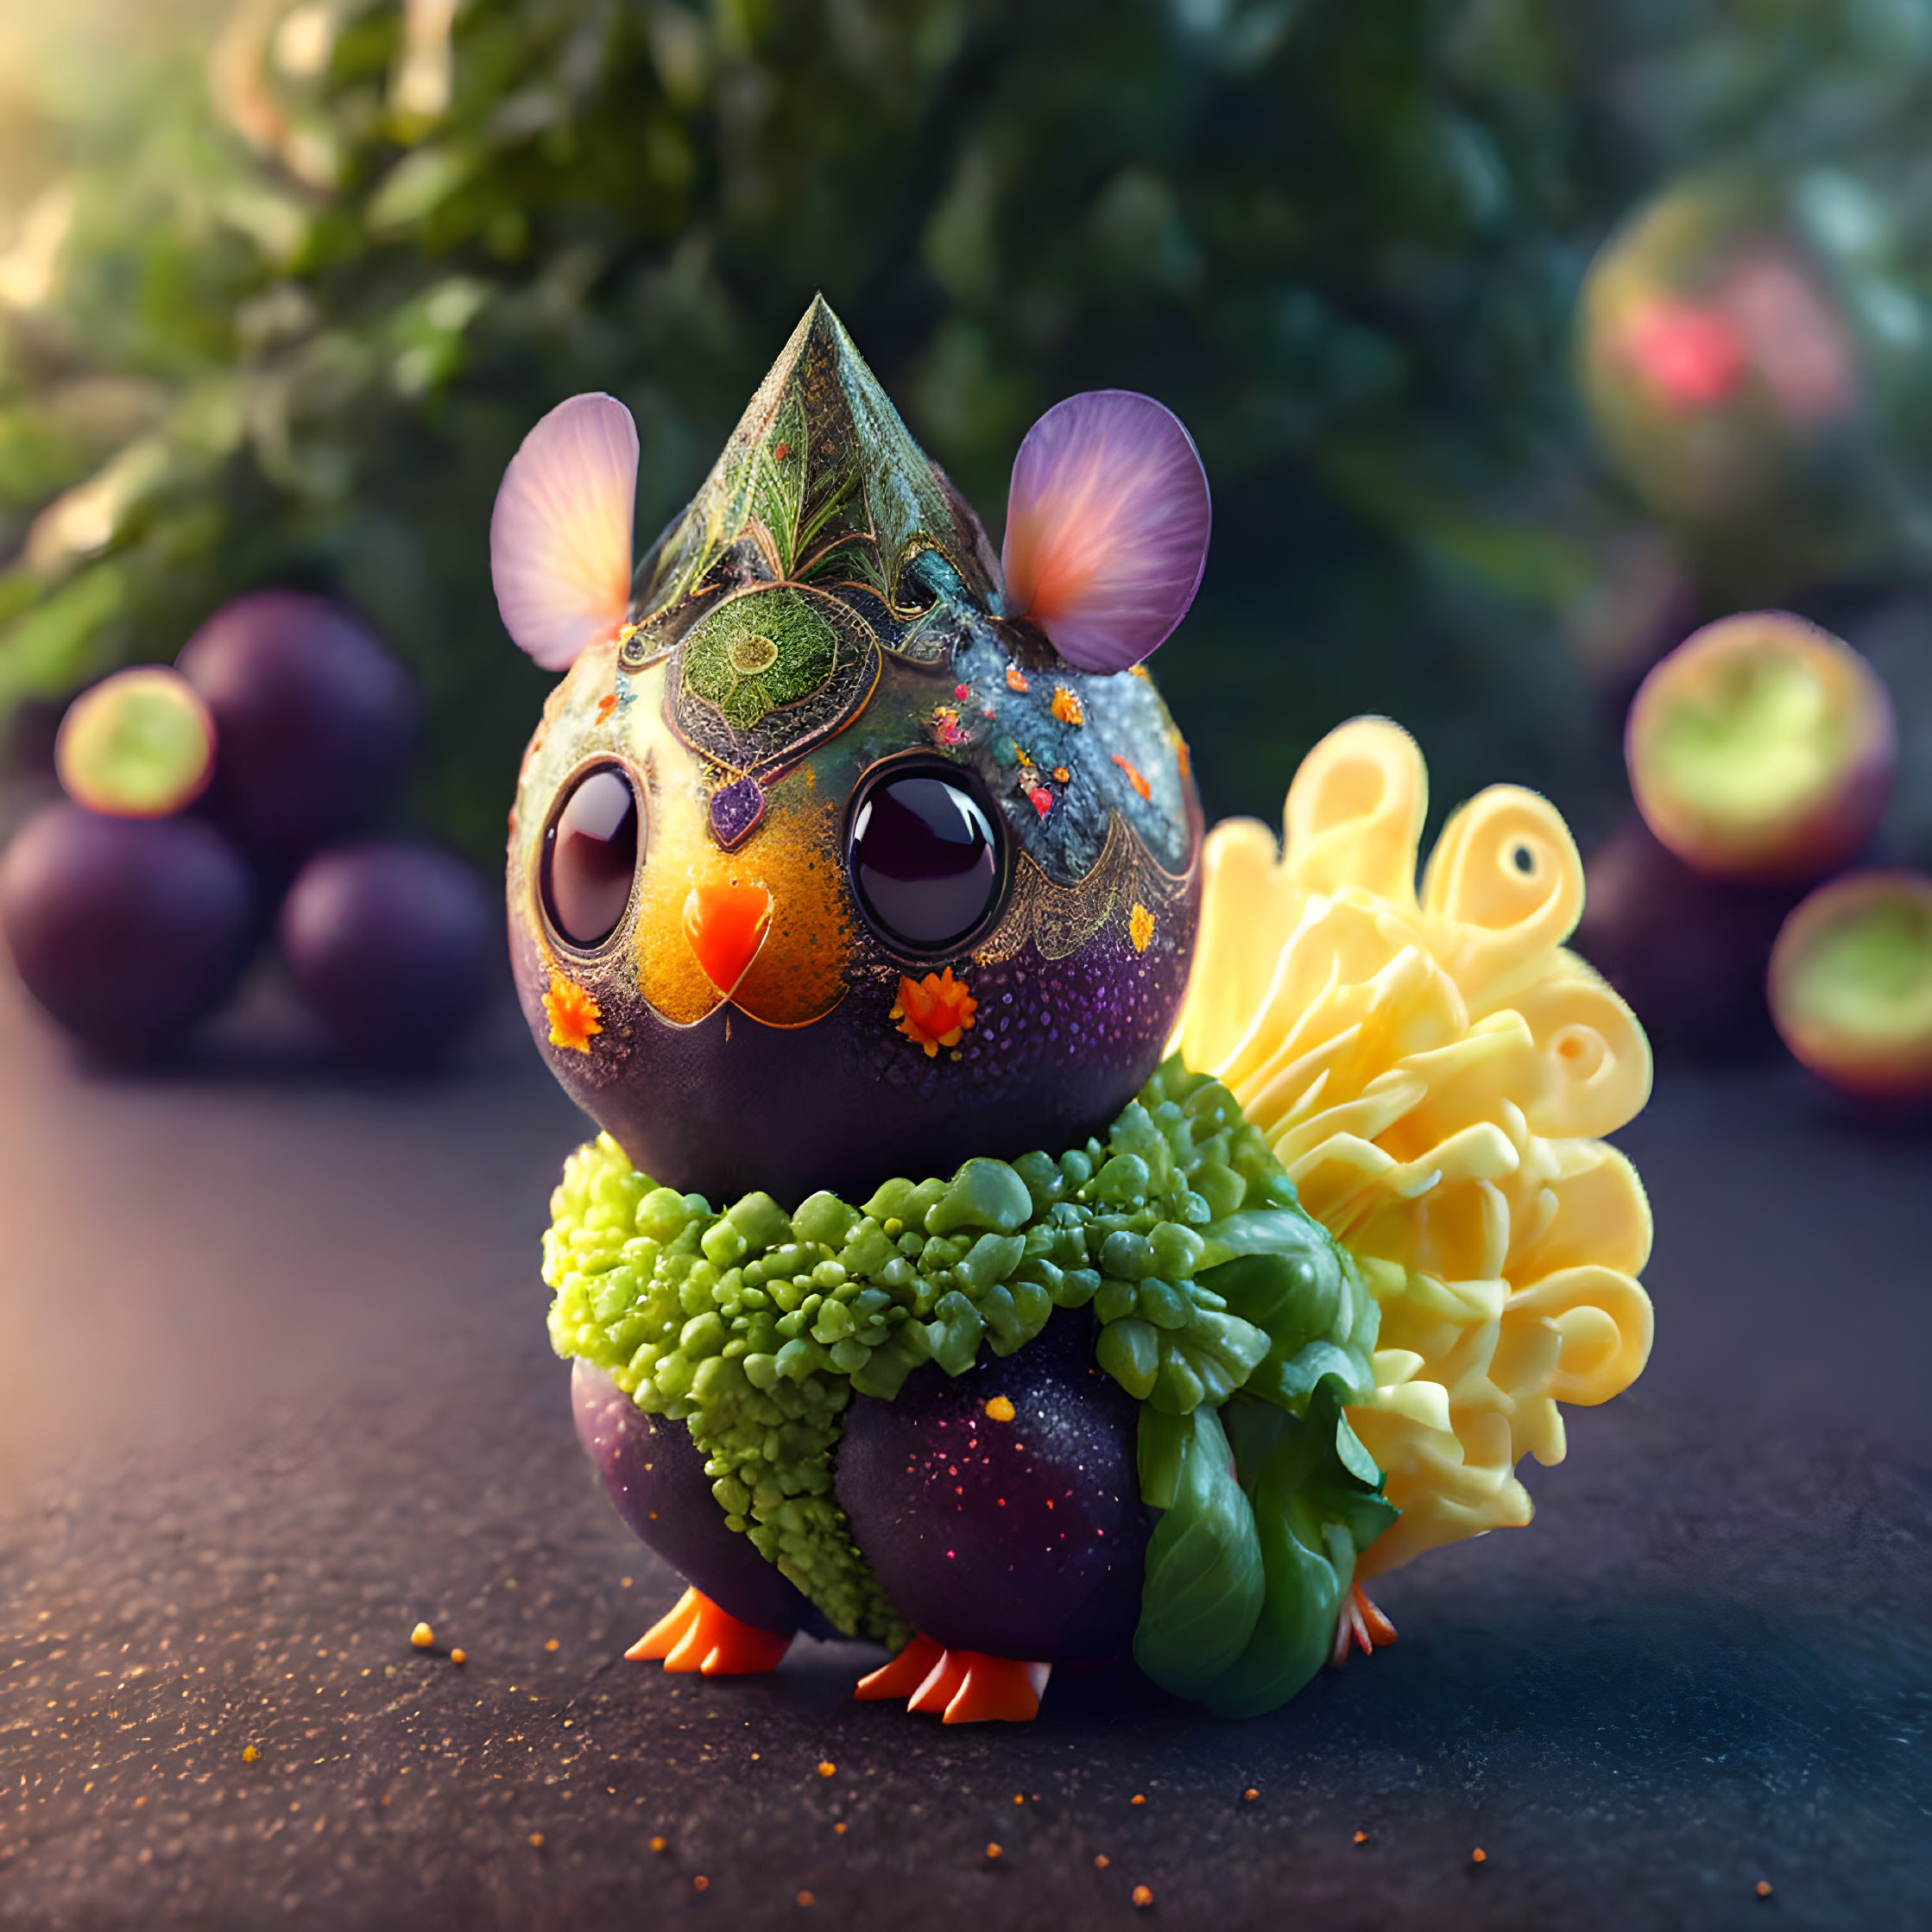 Colorful whimsical creature with fruit-like body and leafy wings on nature background